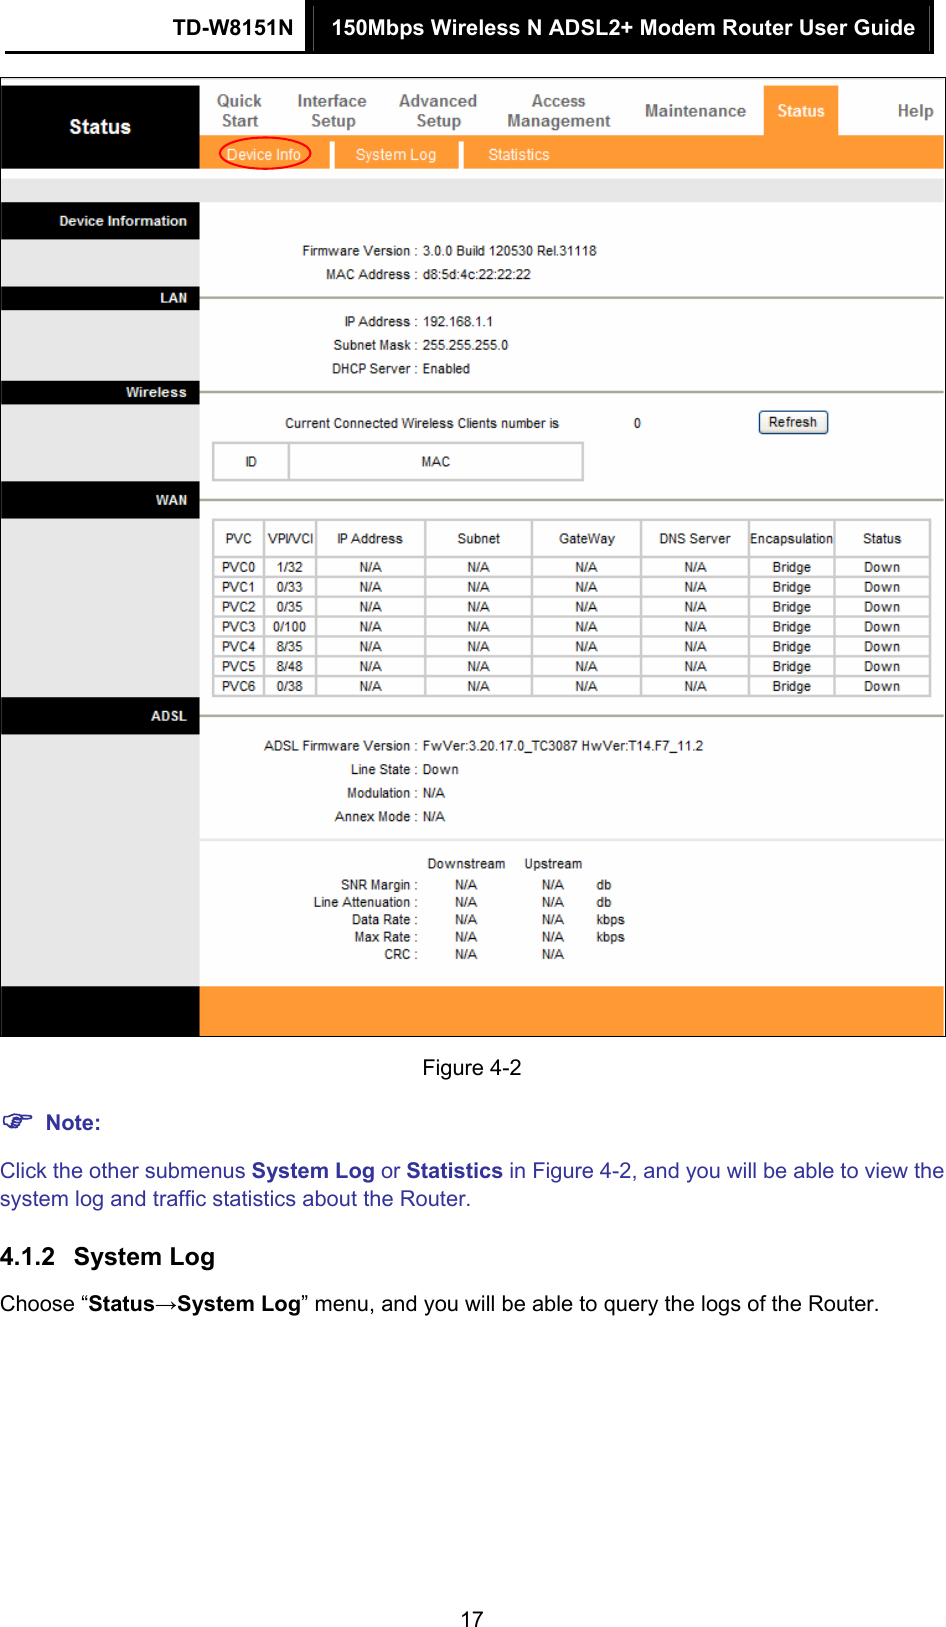 TD-W8151N  150Mbps Wireless N ADSL2+ Modem Router User Guide  17 Figure 4-2  Note: Click the other submenus System Log or Statistics in Figure 4-2, and you will be able to view the system log and traffic statistics about the Router. 4.1.2  System Log Choose “Status→System Log” menu, and you will be able to query the logs of the Router. 